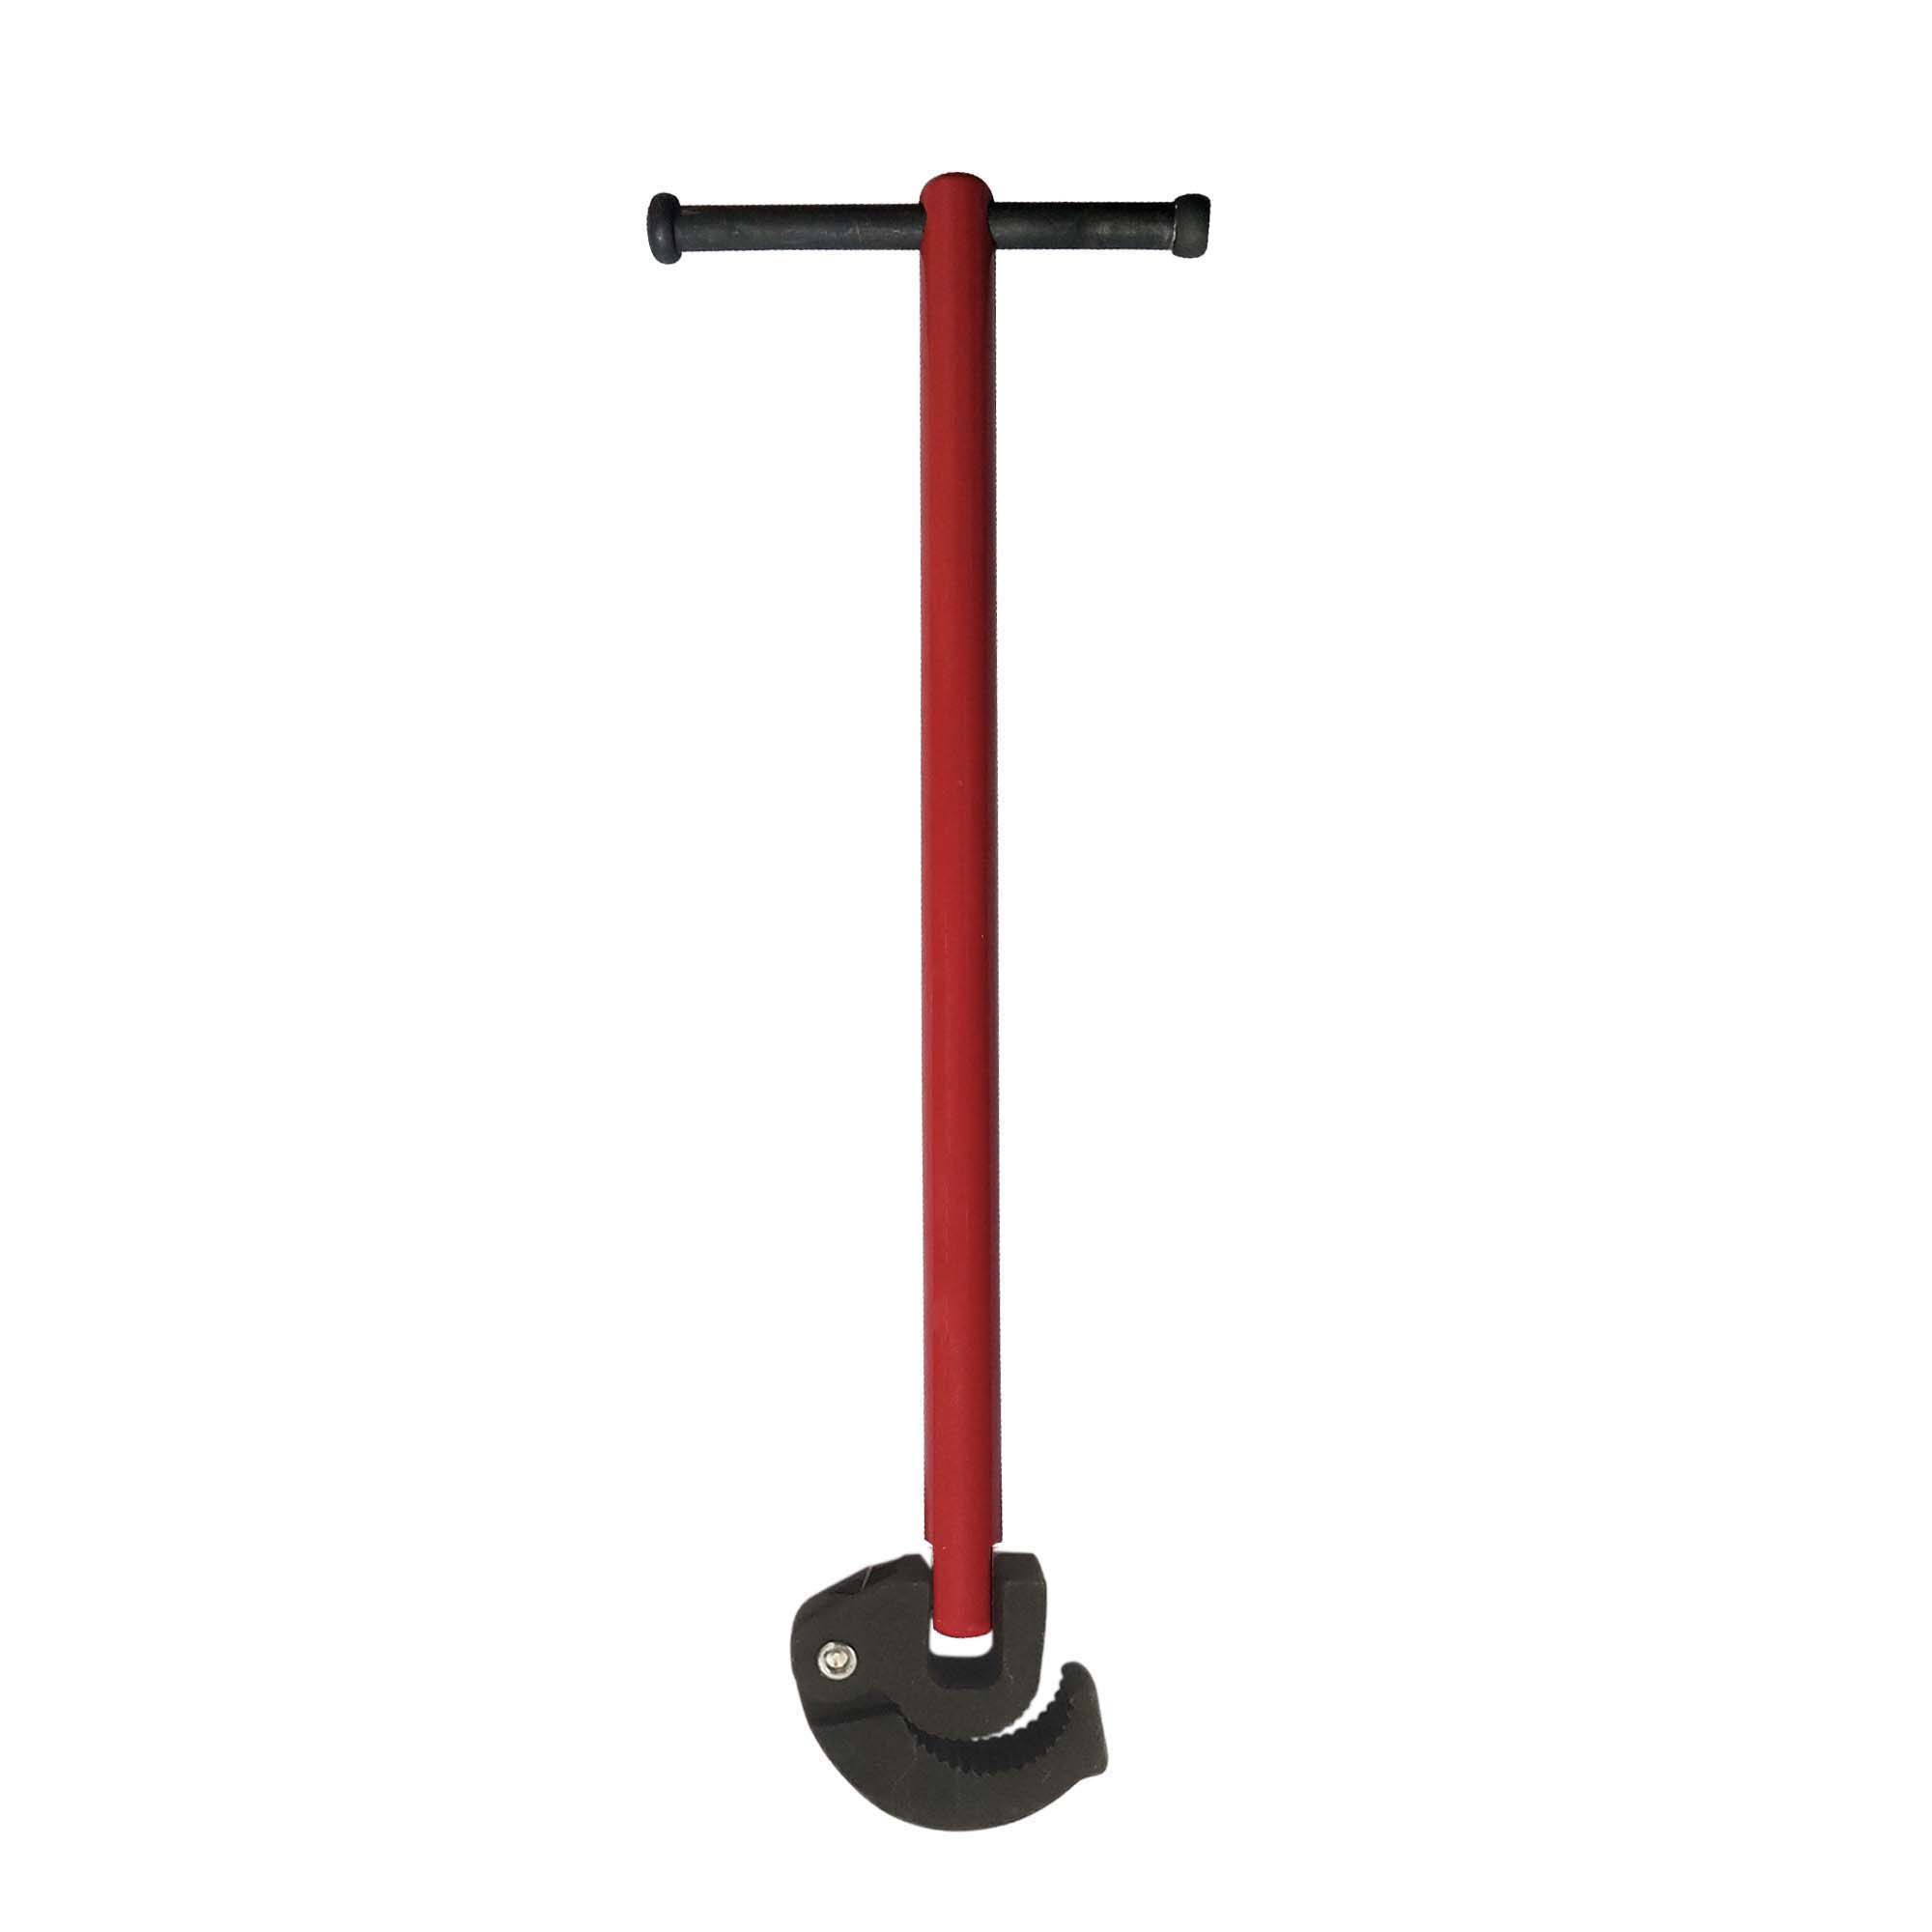 18mm Basin wrench